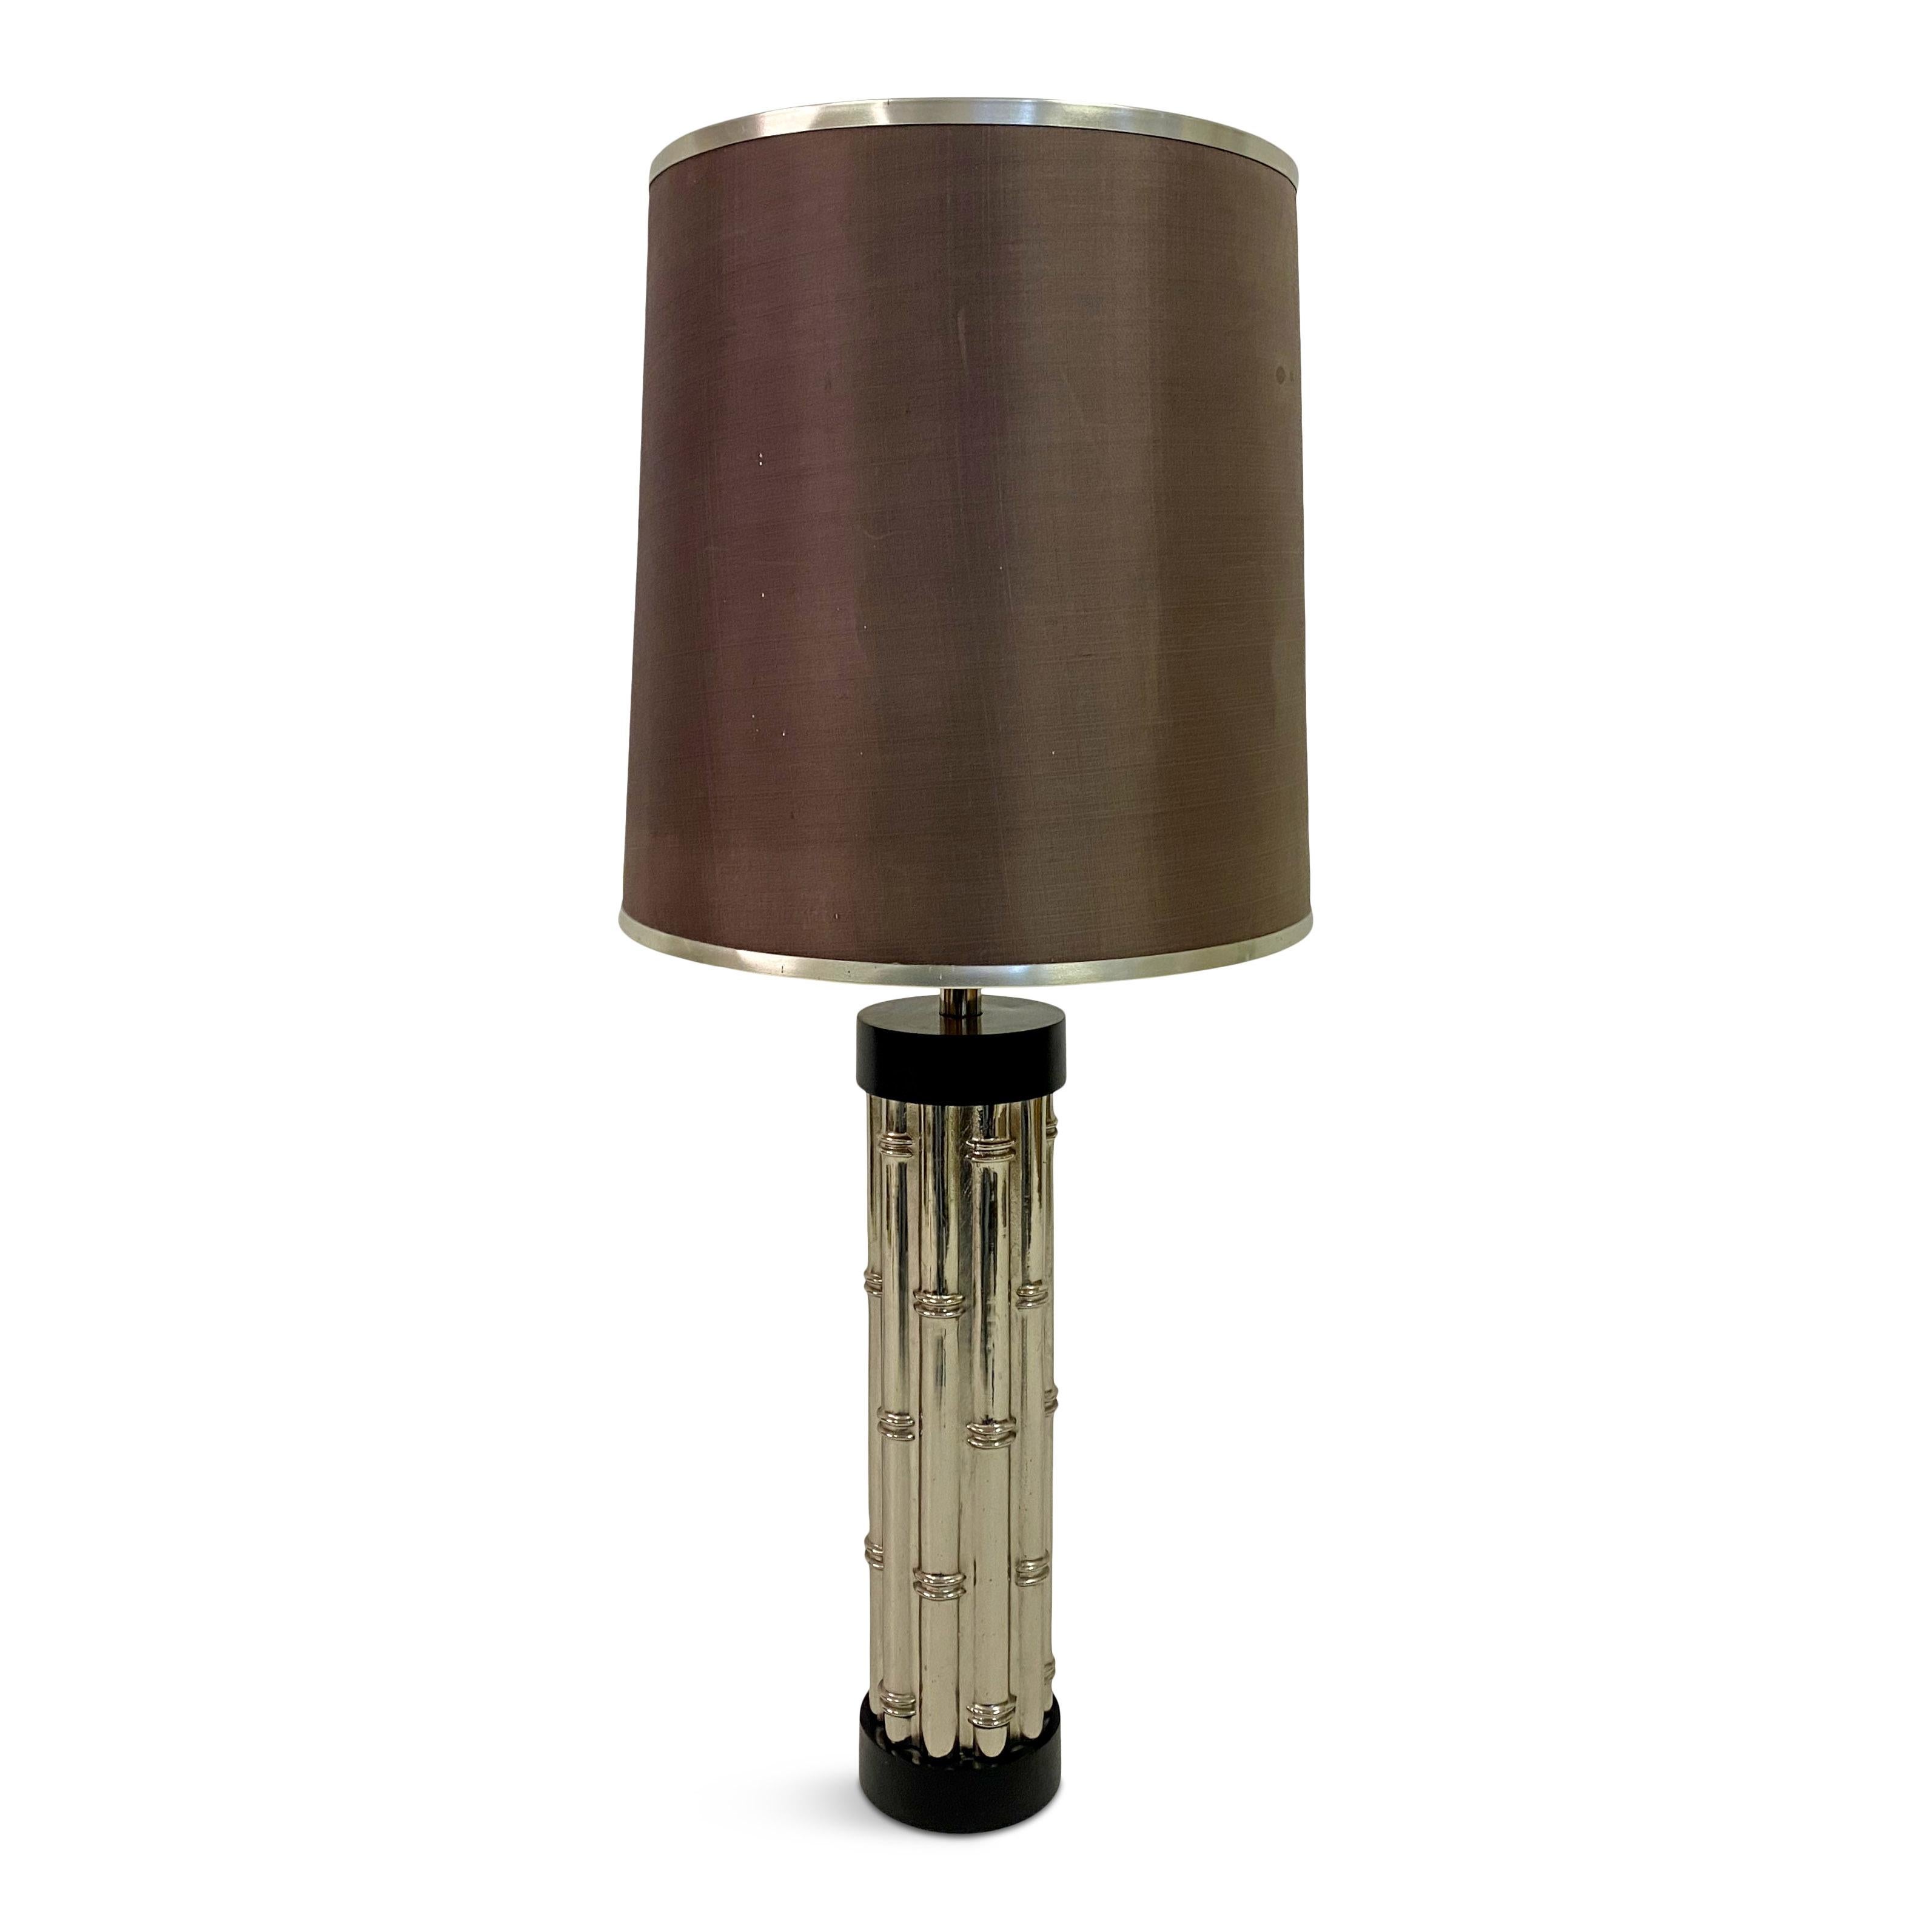 Table lamp

Faux bamboo

Cast aluminium

Probably American 1970s/1980s

Measurements don't include shade.